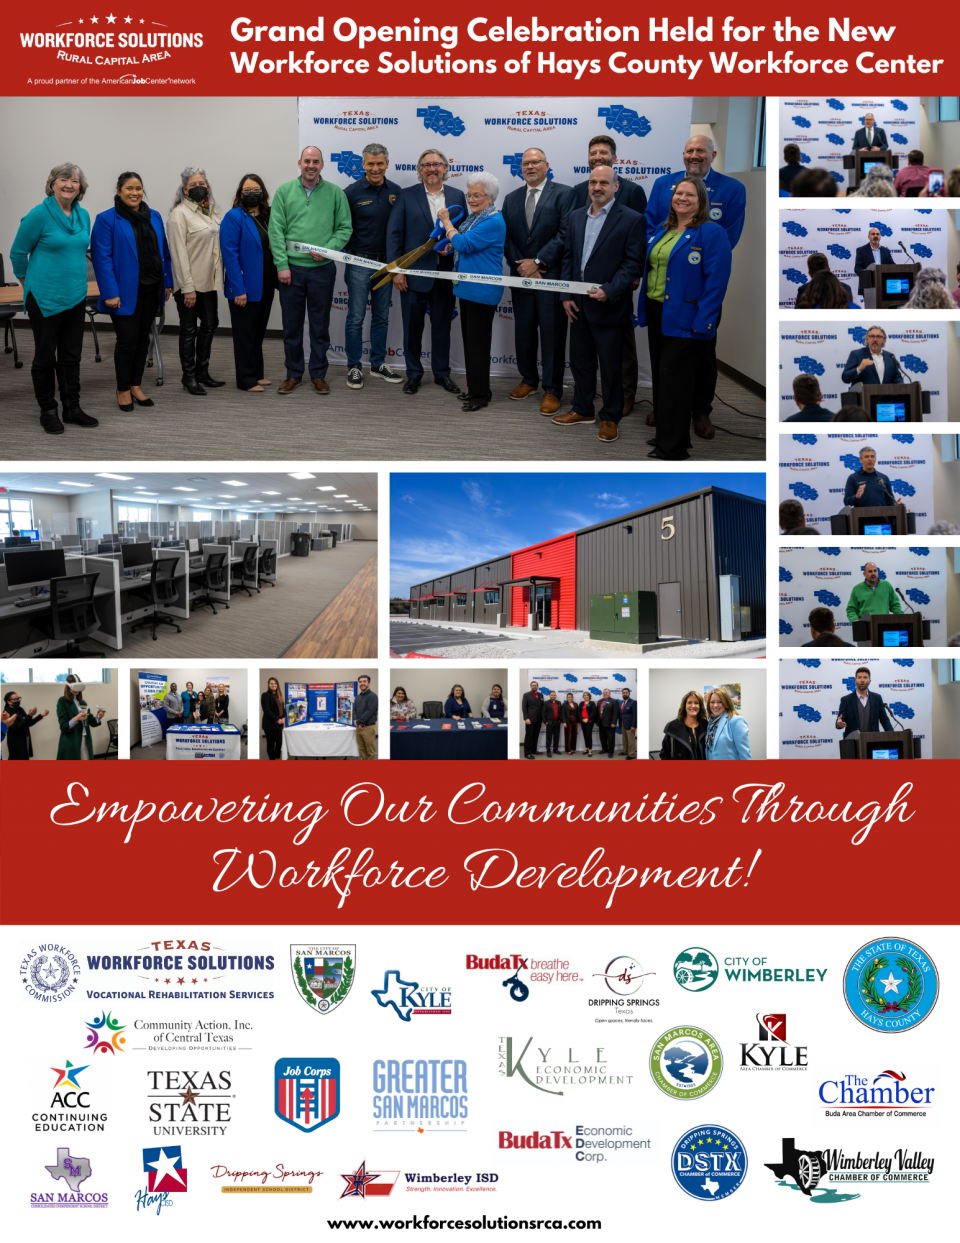 WSRCA Holds Grand Opening Celebration for New Workforce Solutions of Hays County Center